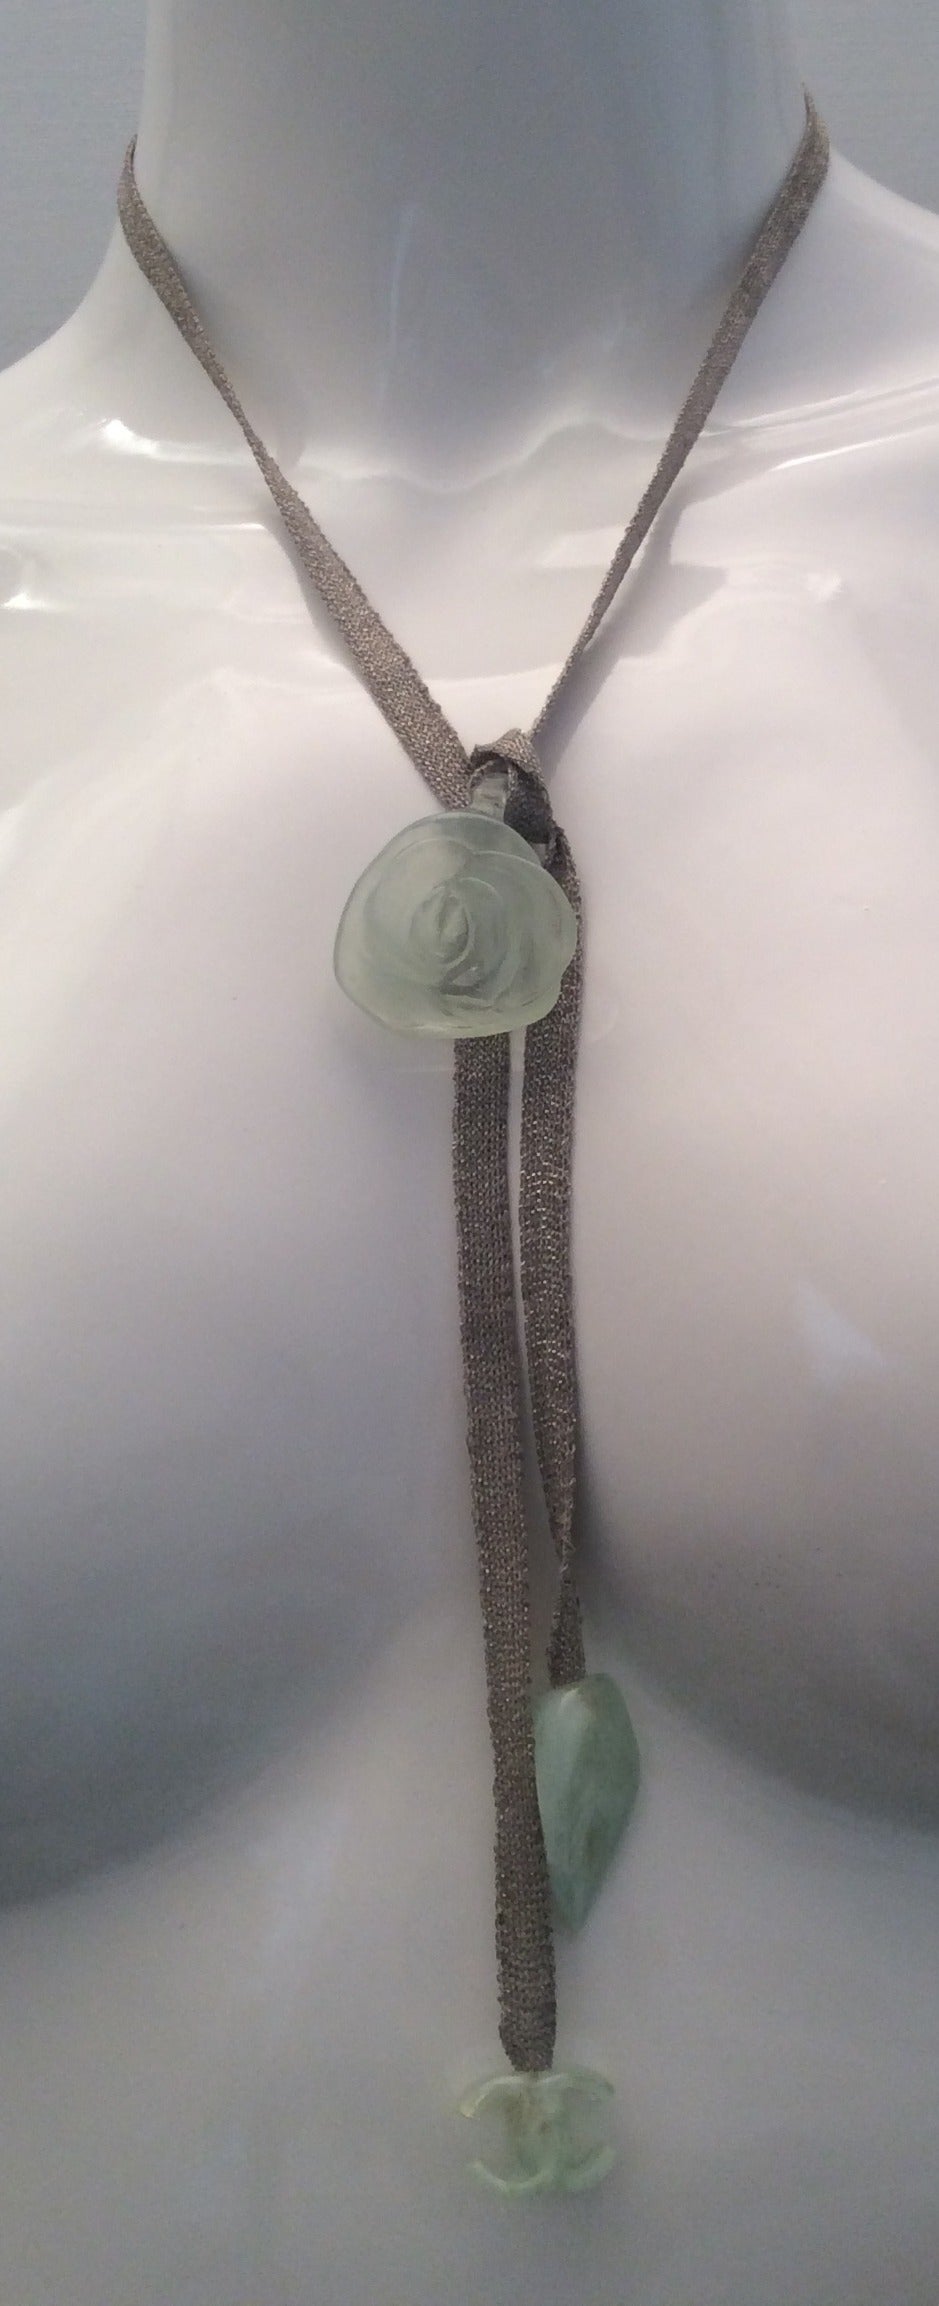 This beautiful Chanel necklace consists of a silver ribbon which starts with a beautiful leaf design in an opalescent creme tone with underlying detection of a greenish tone. It is signed at the bottom of the leaf. The other end of the necklace ends